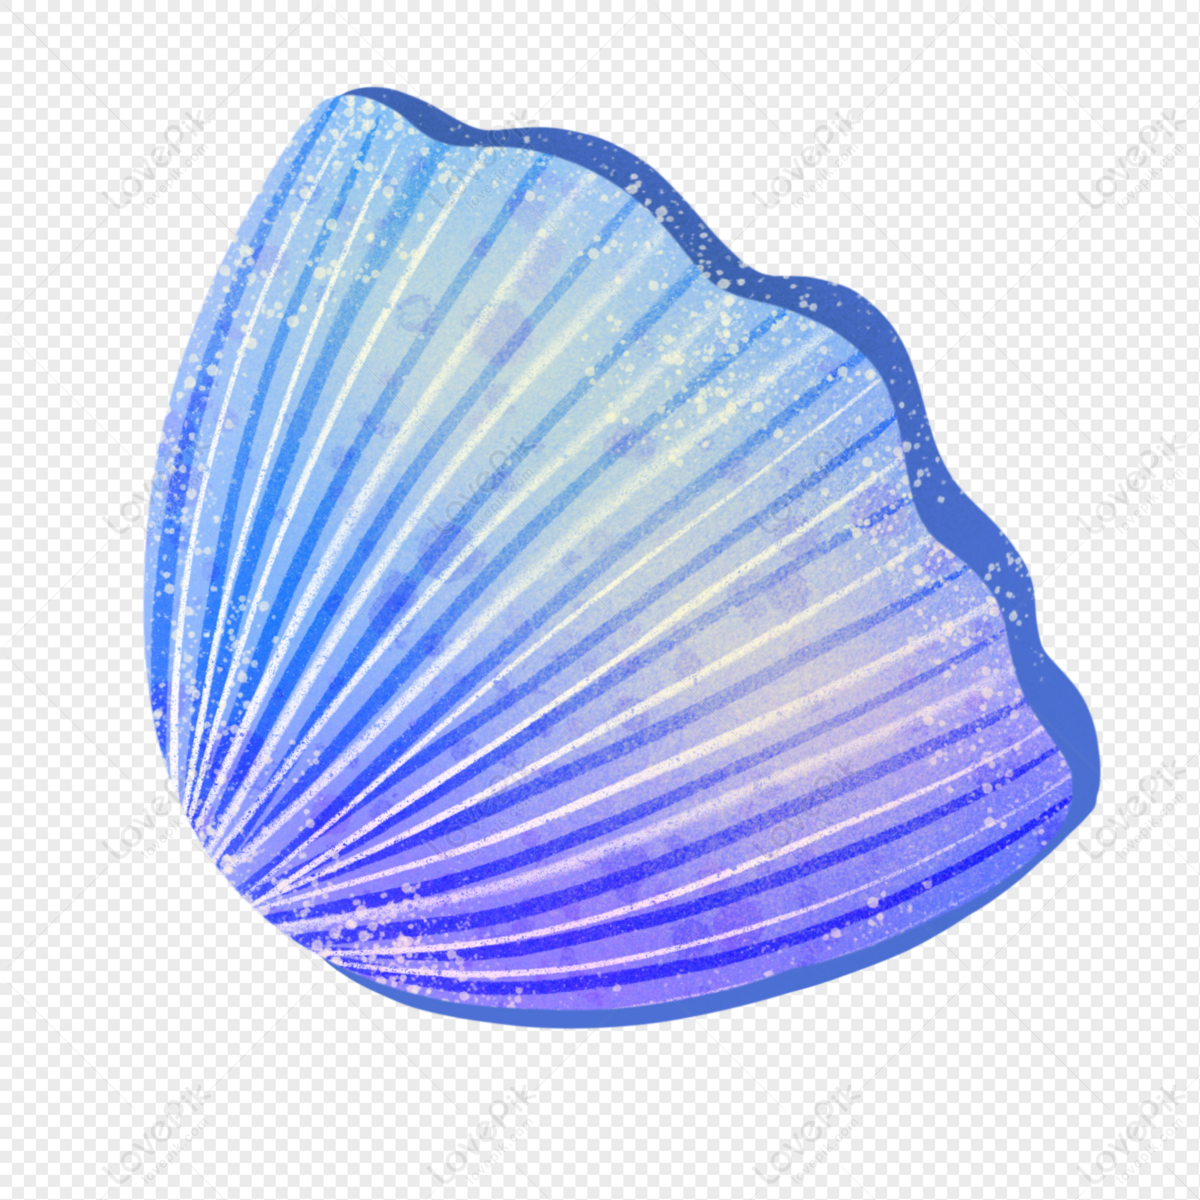 Sea Shell Silhouette PNG Images With Transparent Background | Free ...